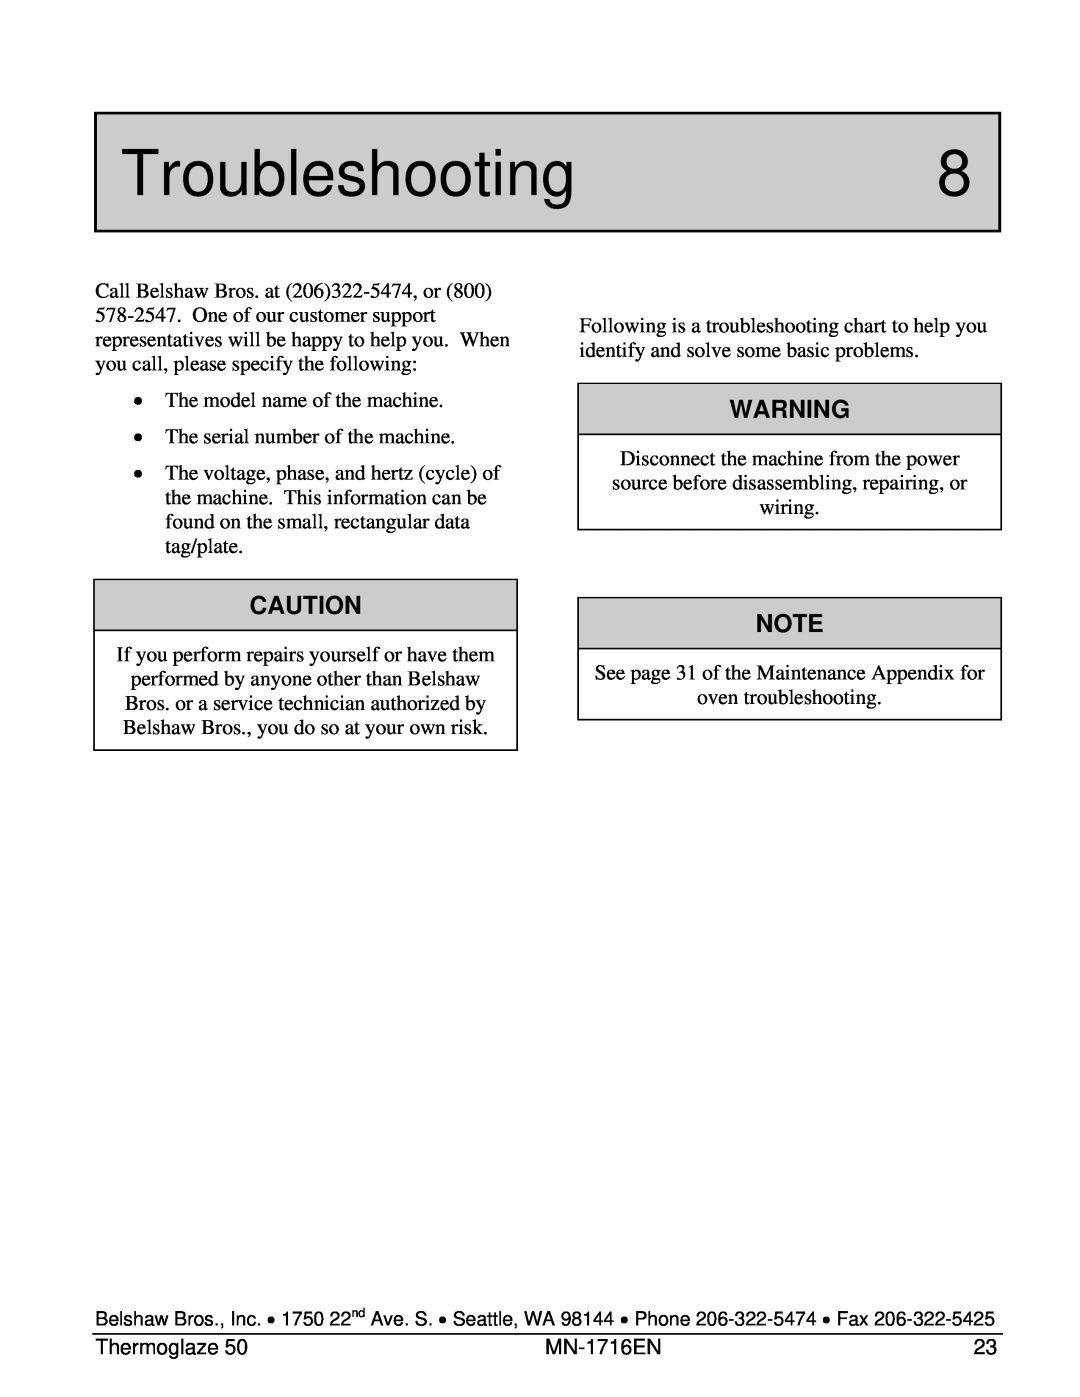 Belshaw Brothers TG 50 manual Troubleshooting8 